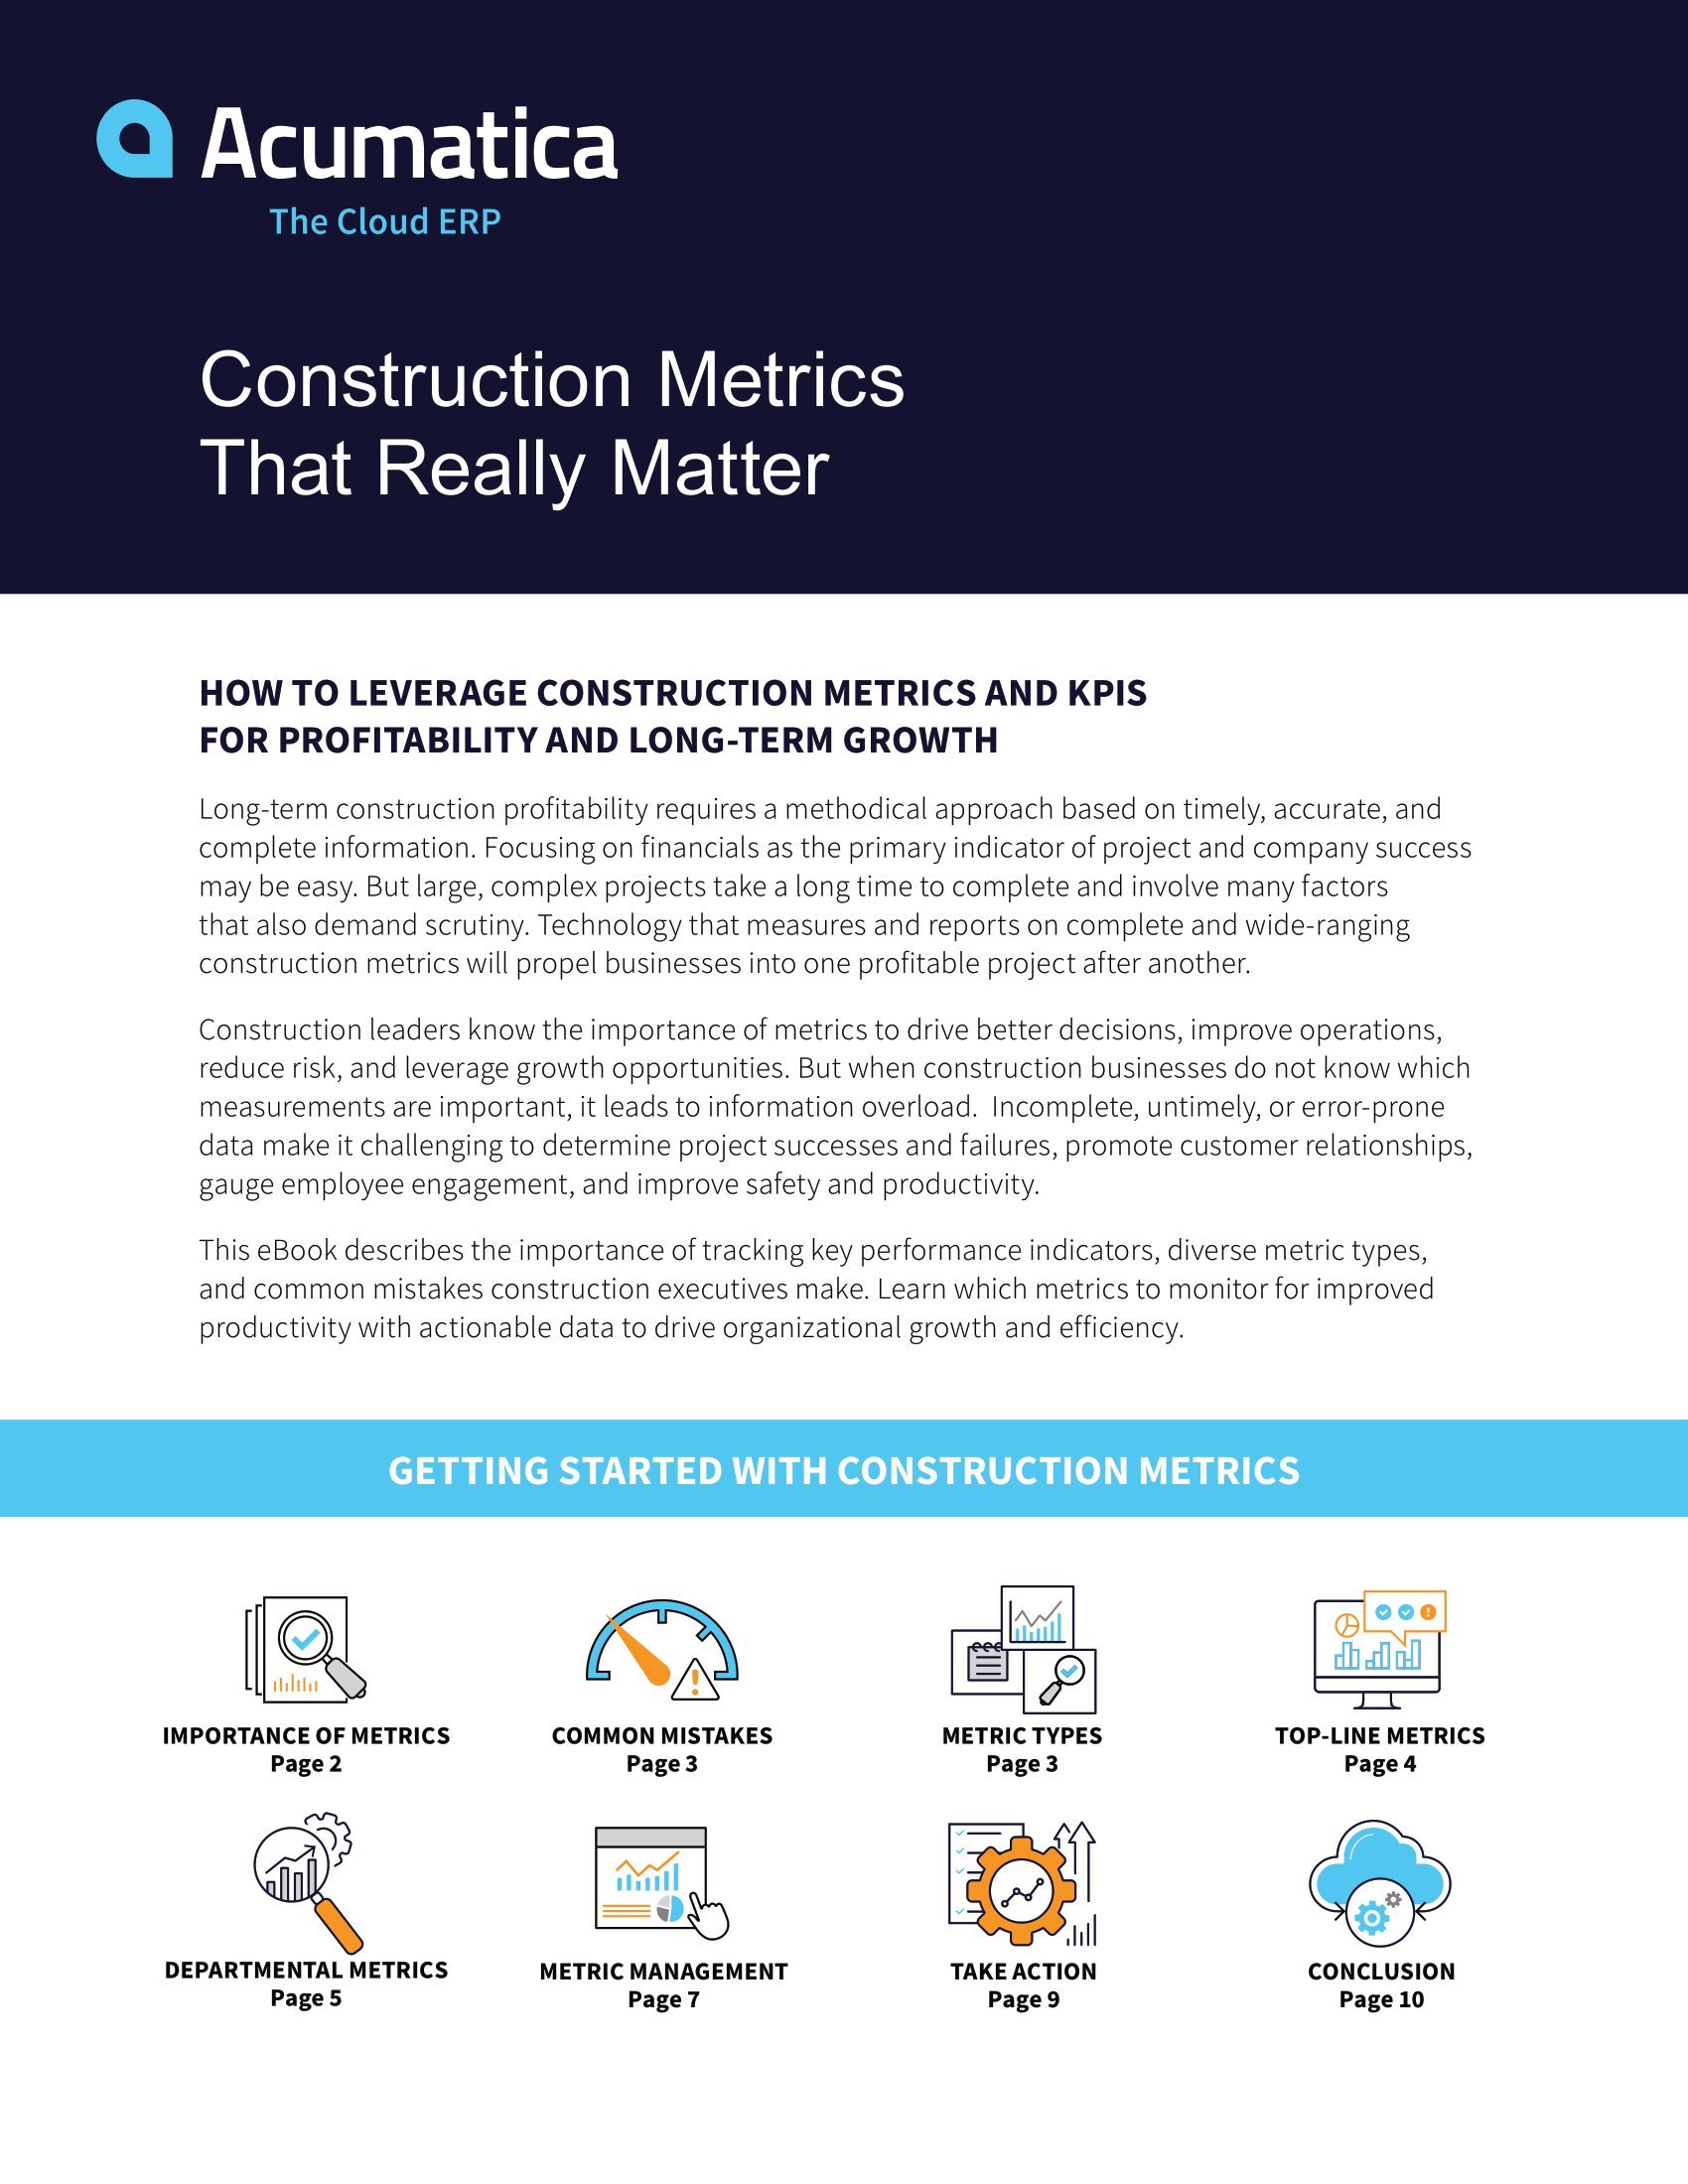 Measurable Growth Begins with Measuring the Right Construction Metrics